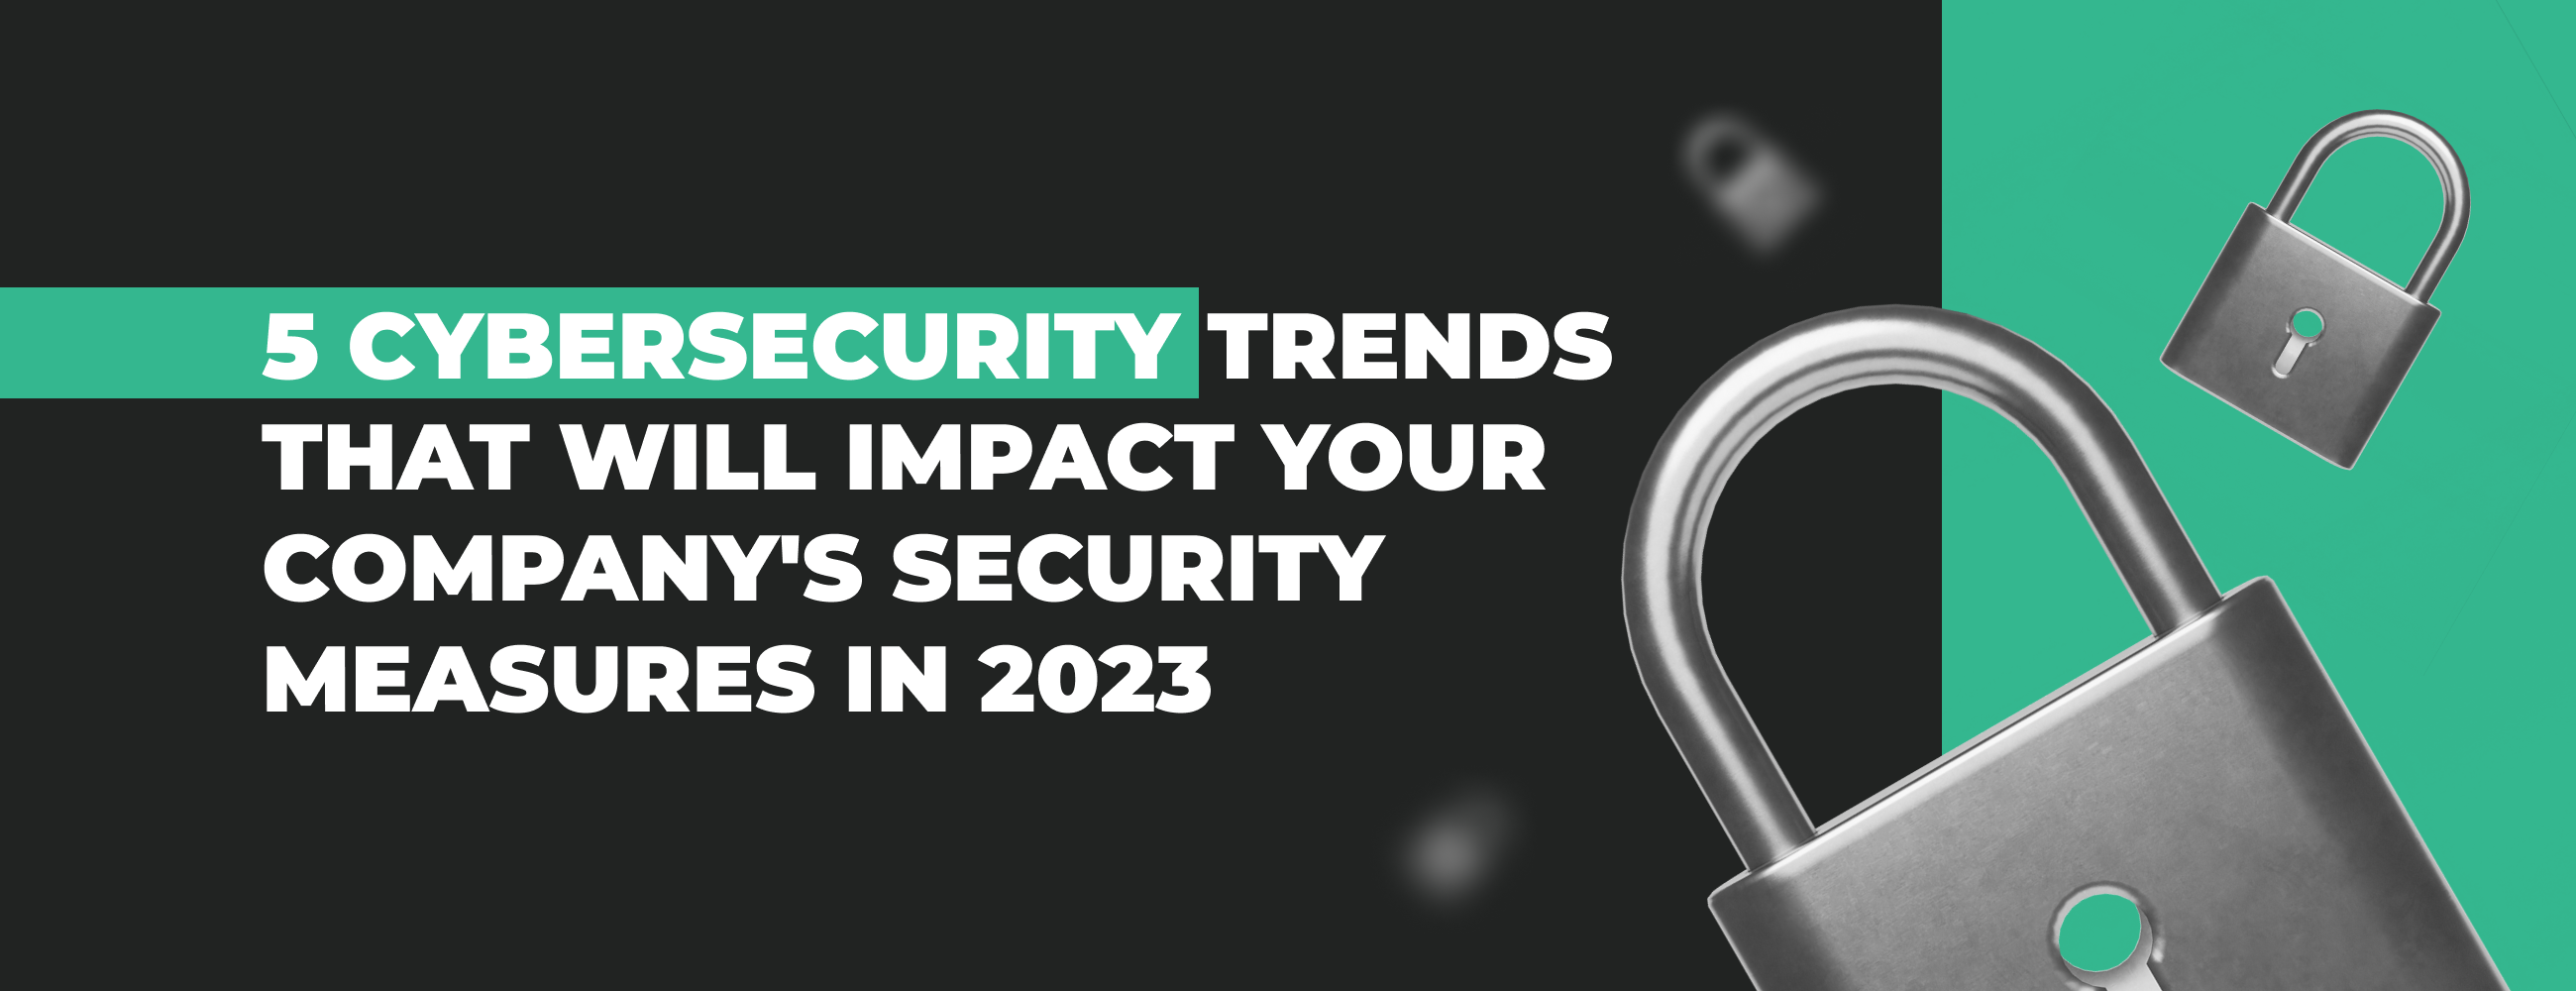 5 Cybersecurity Trends That Will Impact Your Company's Security Measures in 2023